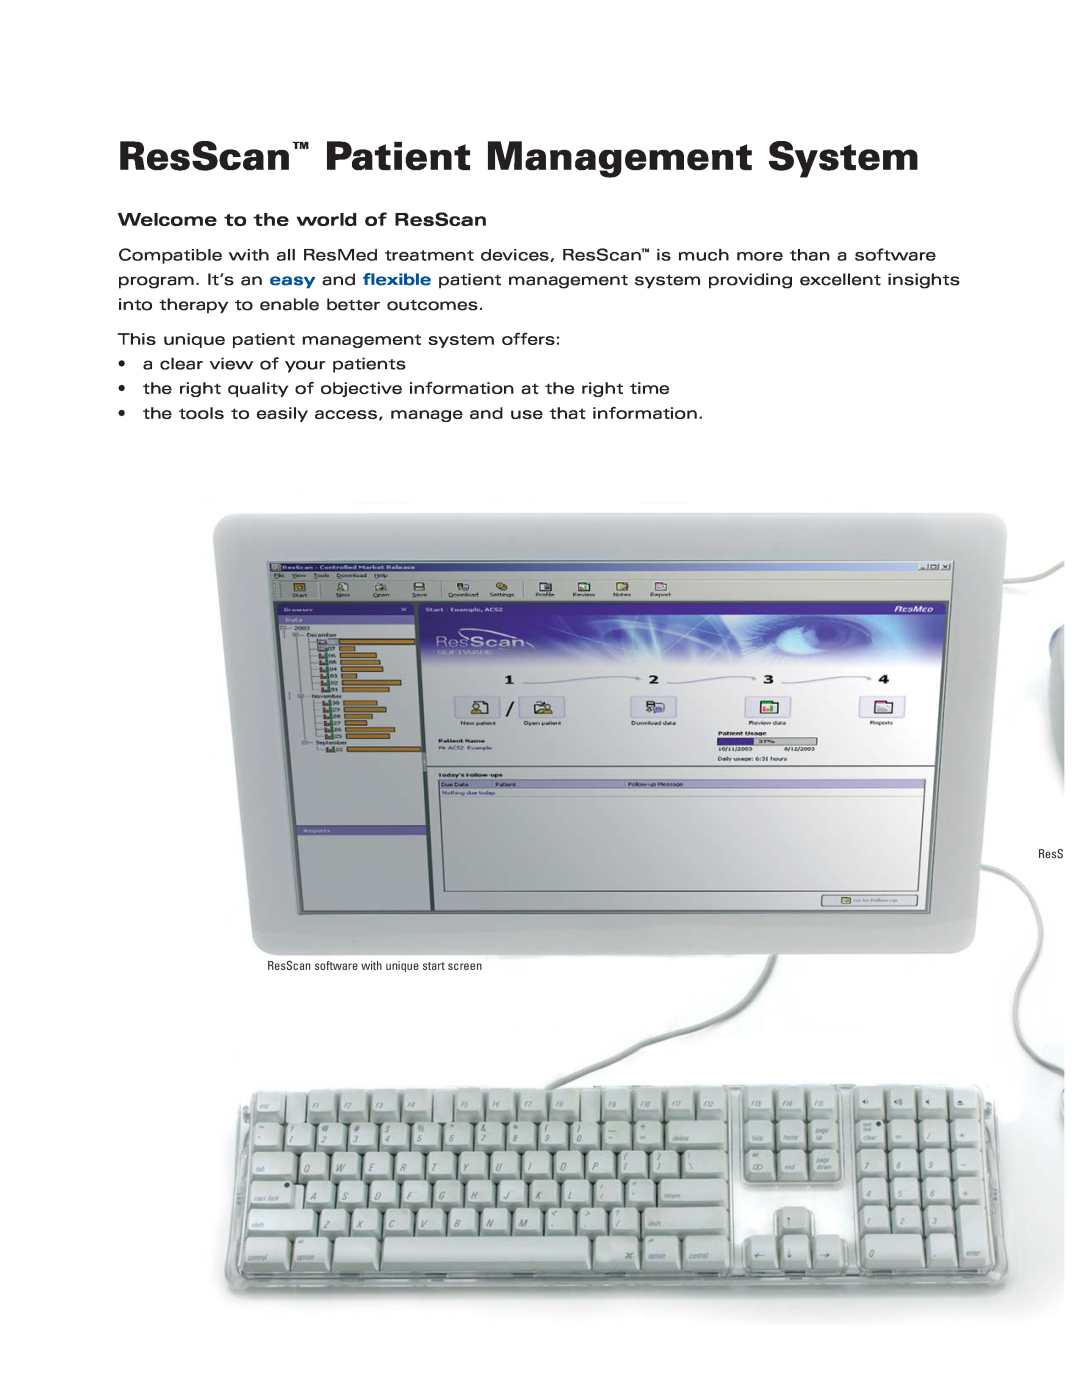 ResMed manual Welcome to the world of ResScan, ResScan Patient Management System 